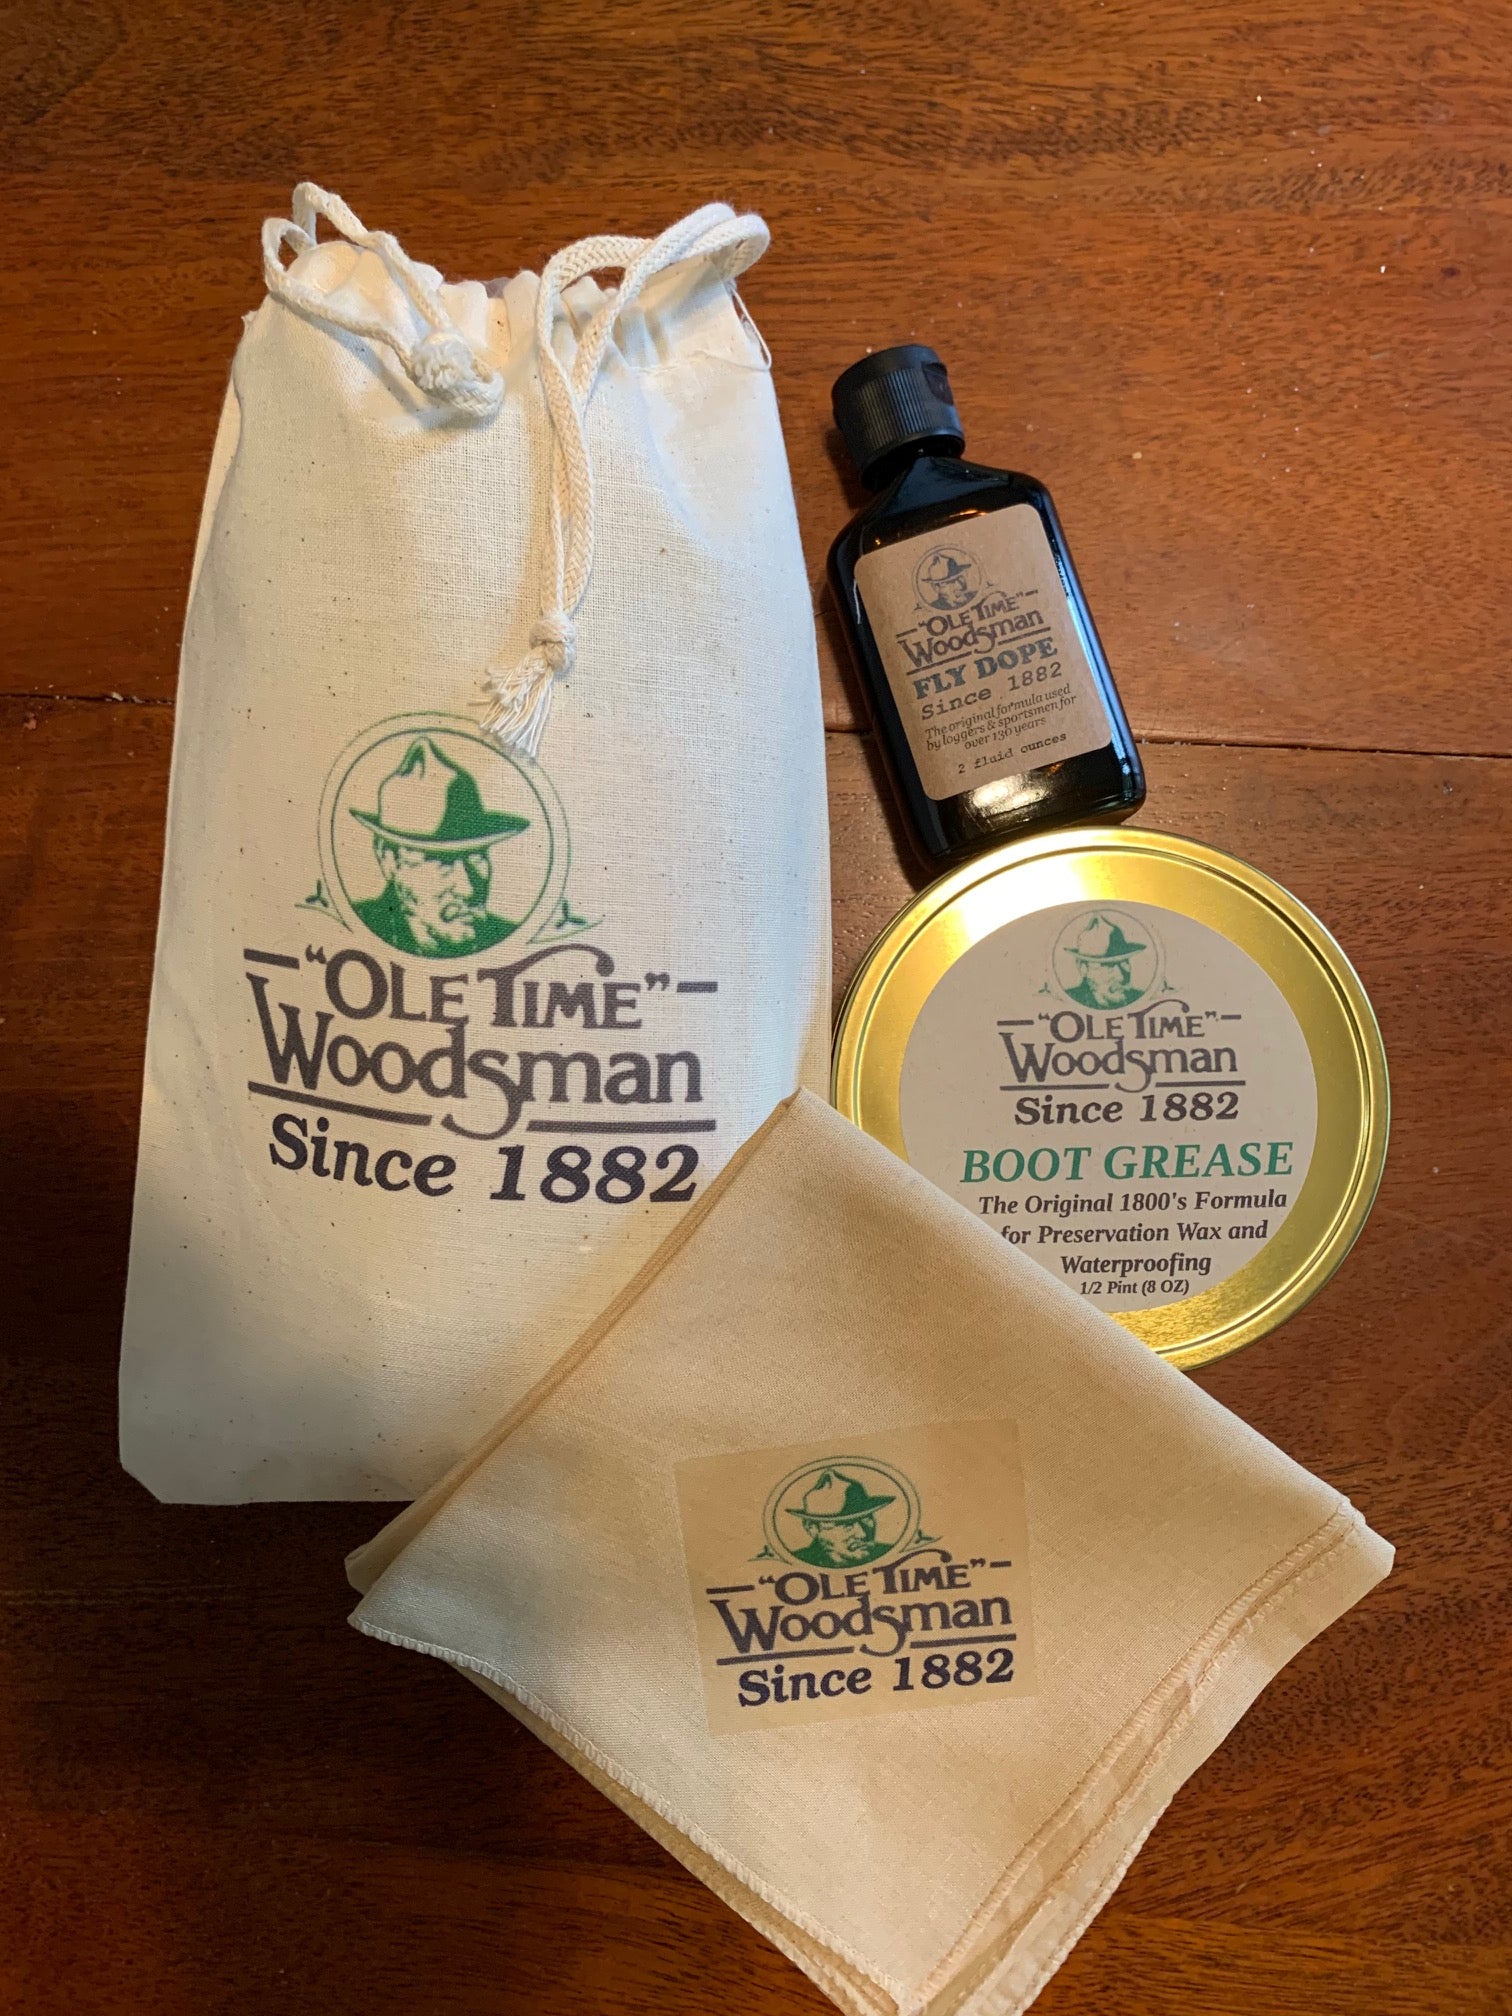 Ole Time Woodsman Gift Pack for All of those who Love the Great Outdoors! (Free Shipping in USA) - Ole Time Woodsman Fly Dope "Since 1882, The World's First and Best Protection Against All Biting Insects!"